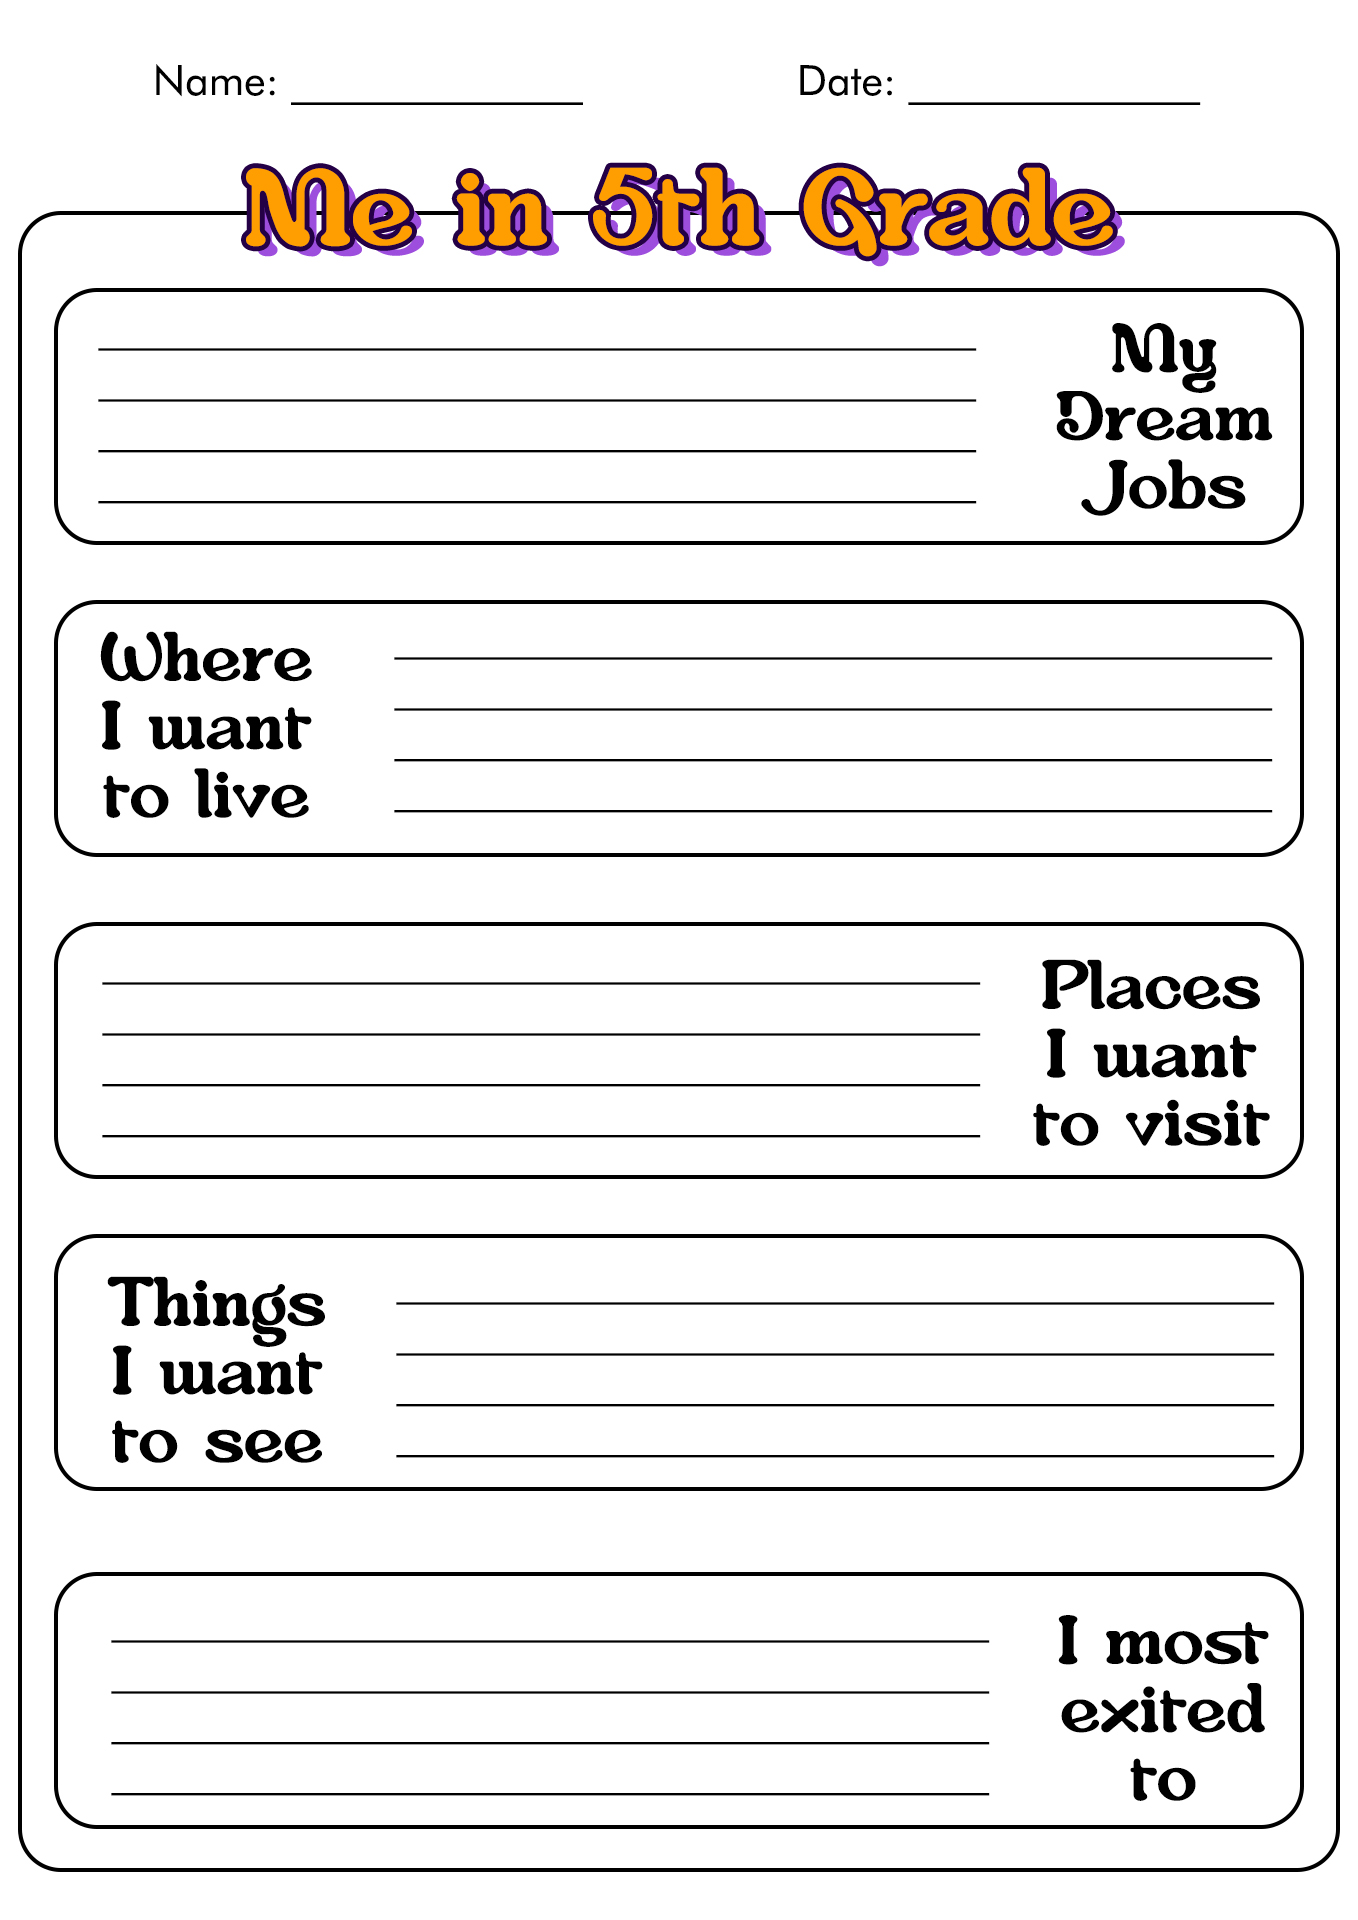 12 Best Images Of Self Portrait First Day Of School Worksheets Self 